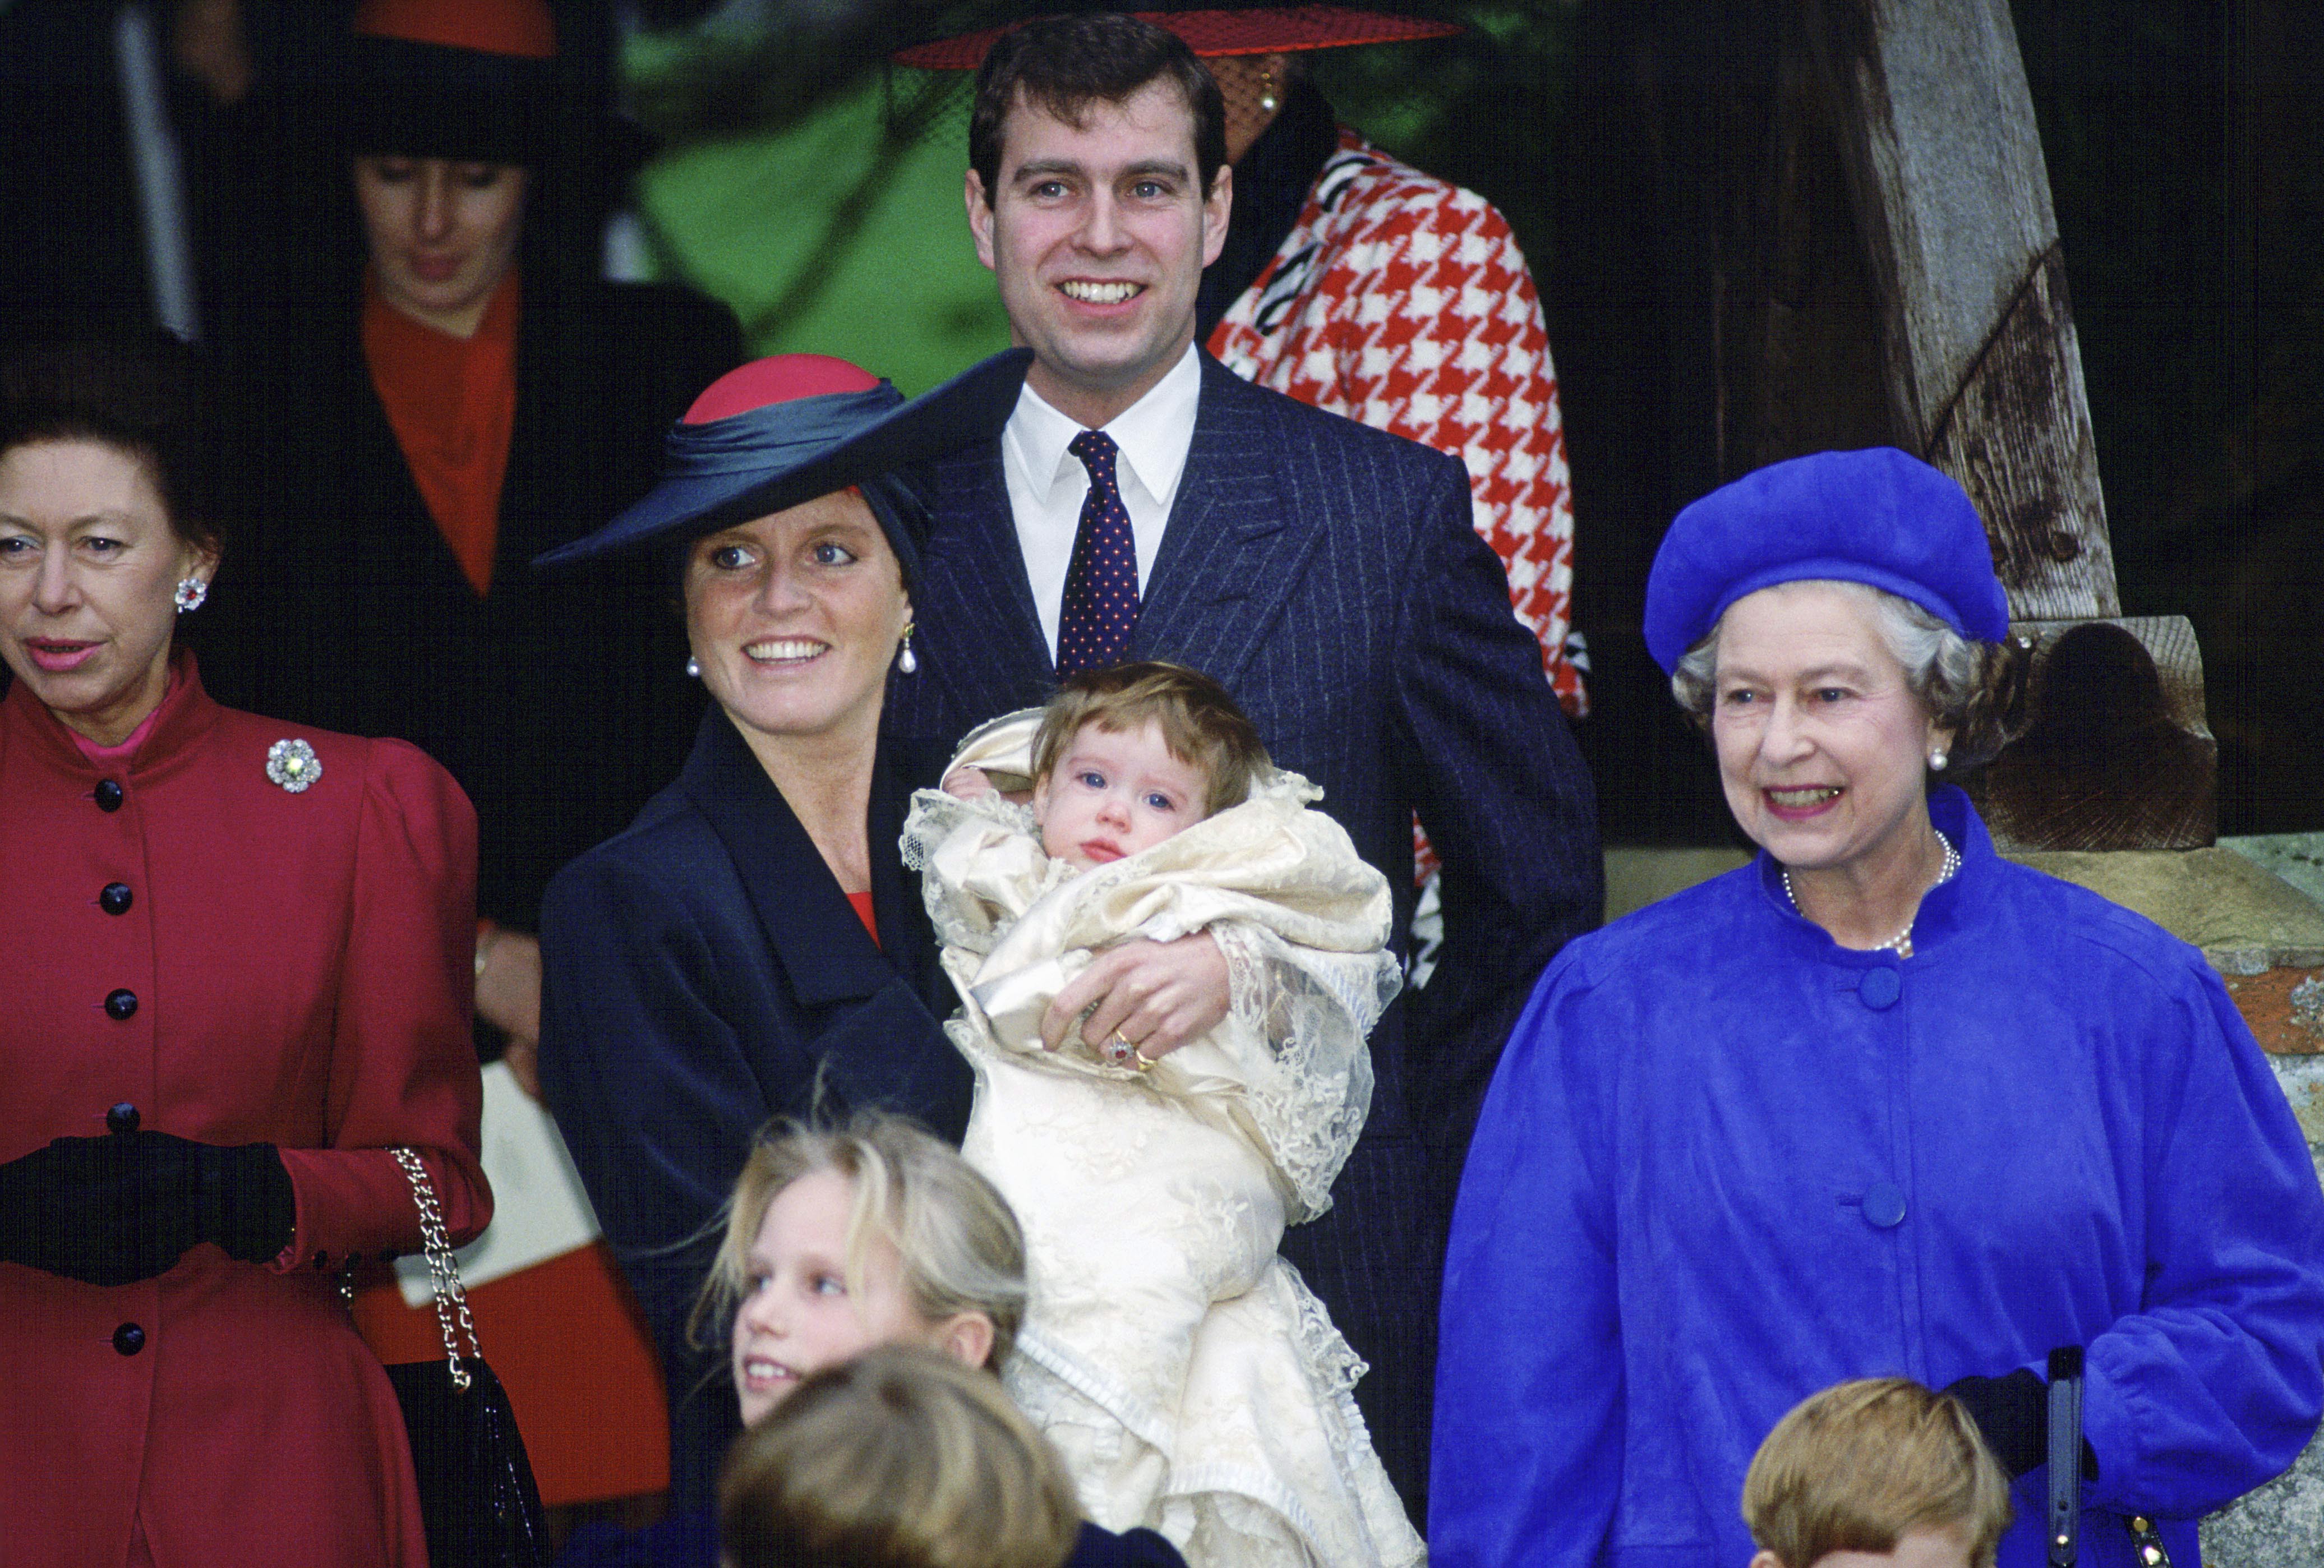 <p>Queen Elizabeth II was the guest of honor at granddaughter Princess Eugenie's christening at St. Mary Magdalene Church on the monarch's Sandringham estate in England's Norfolk region on Dec. 23, 1990. Princess Margaret, Sarah, Duchess of York, Prince Andrew and Zara Phillips (now Zara Tindall) are also pictured.</p>